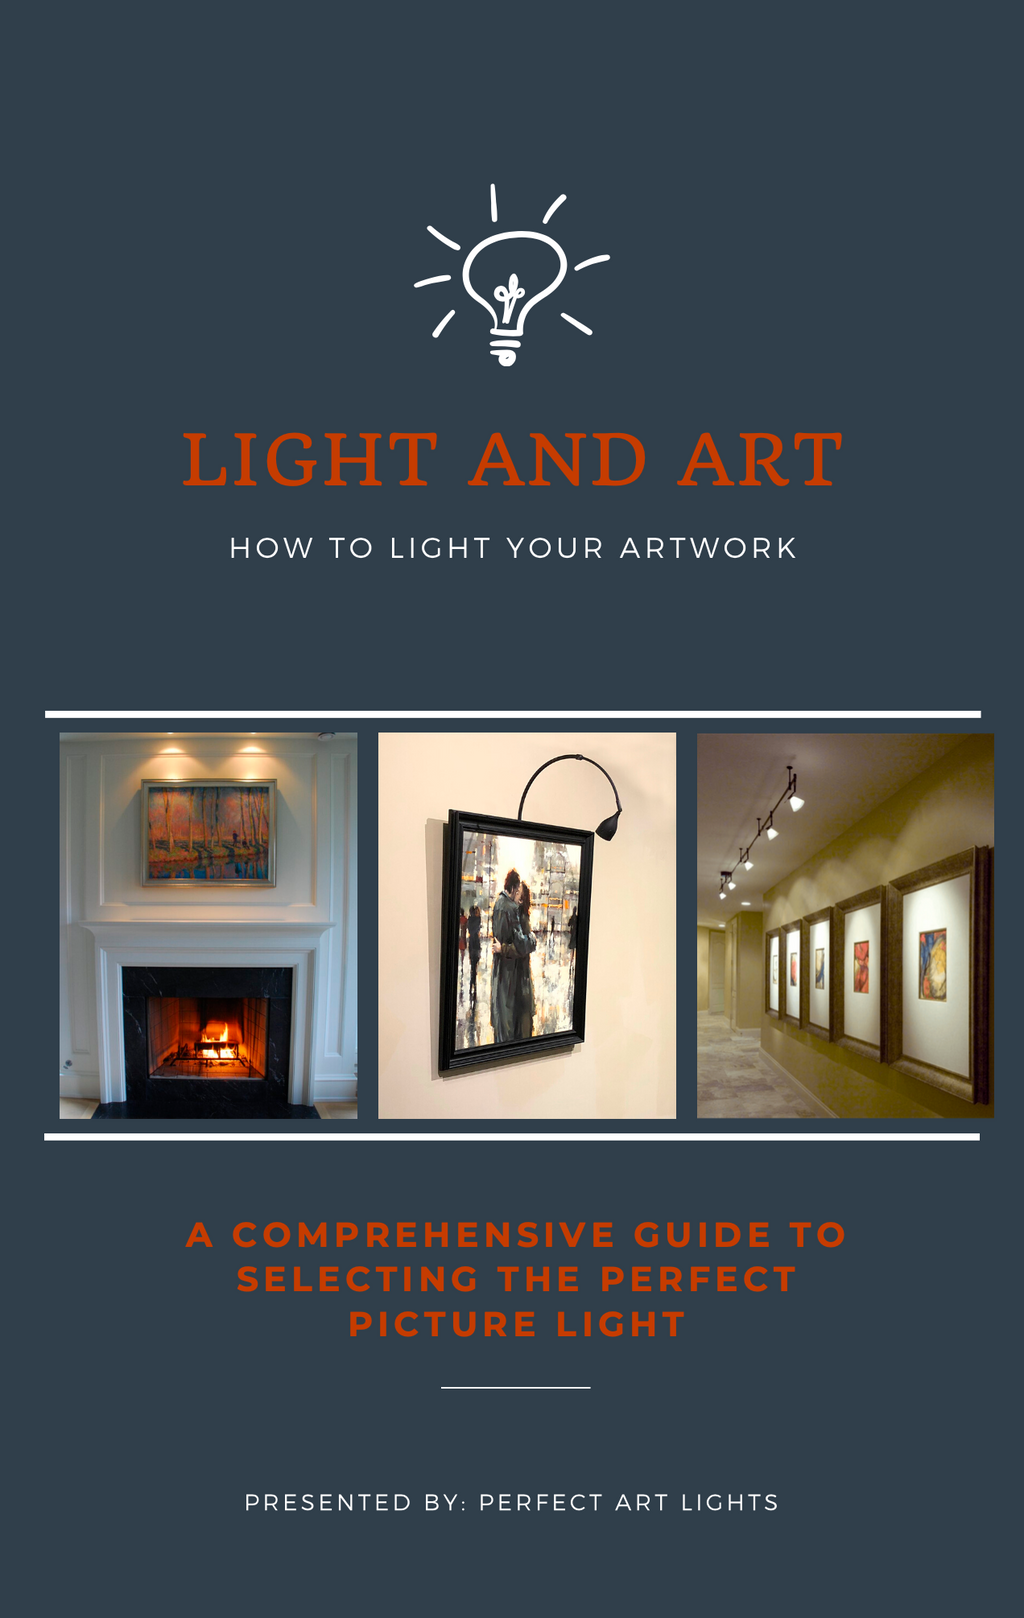 LIGHT AND ART -  A comprehensive guide to selecting the perfect picture light - Perfect Art Lights